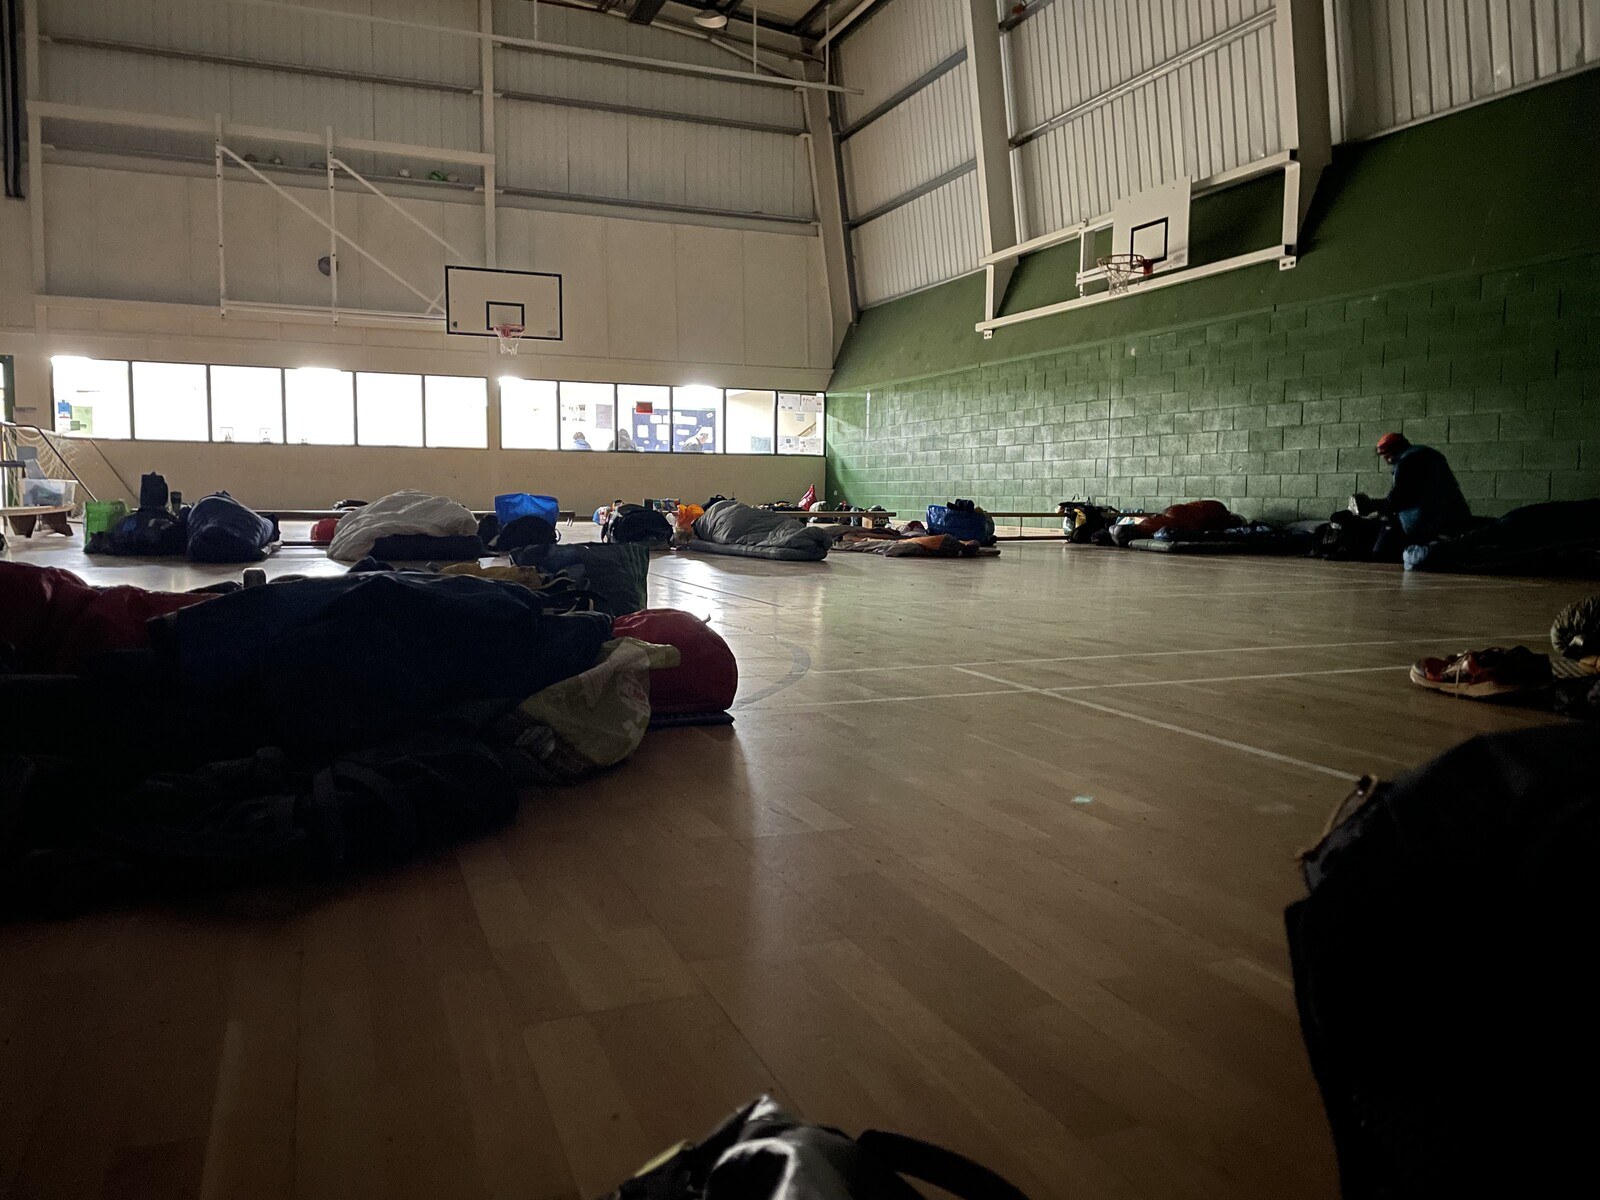 A bunch of people all curled up in sleeping bags on the floor of a gymnasium. The lights are out in the gym but the light from the hall floods through the glass at the end of the room.